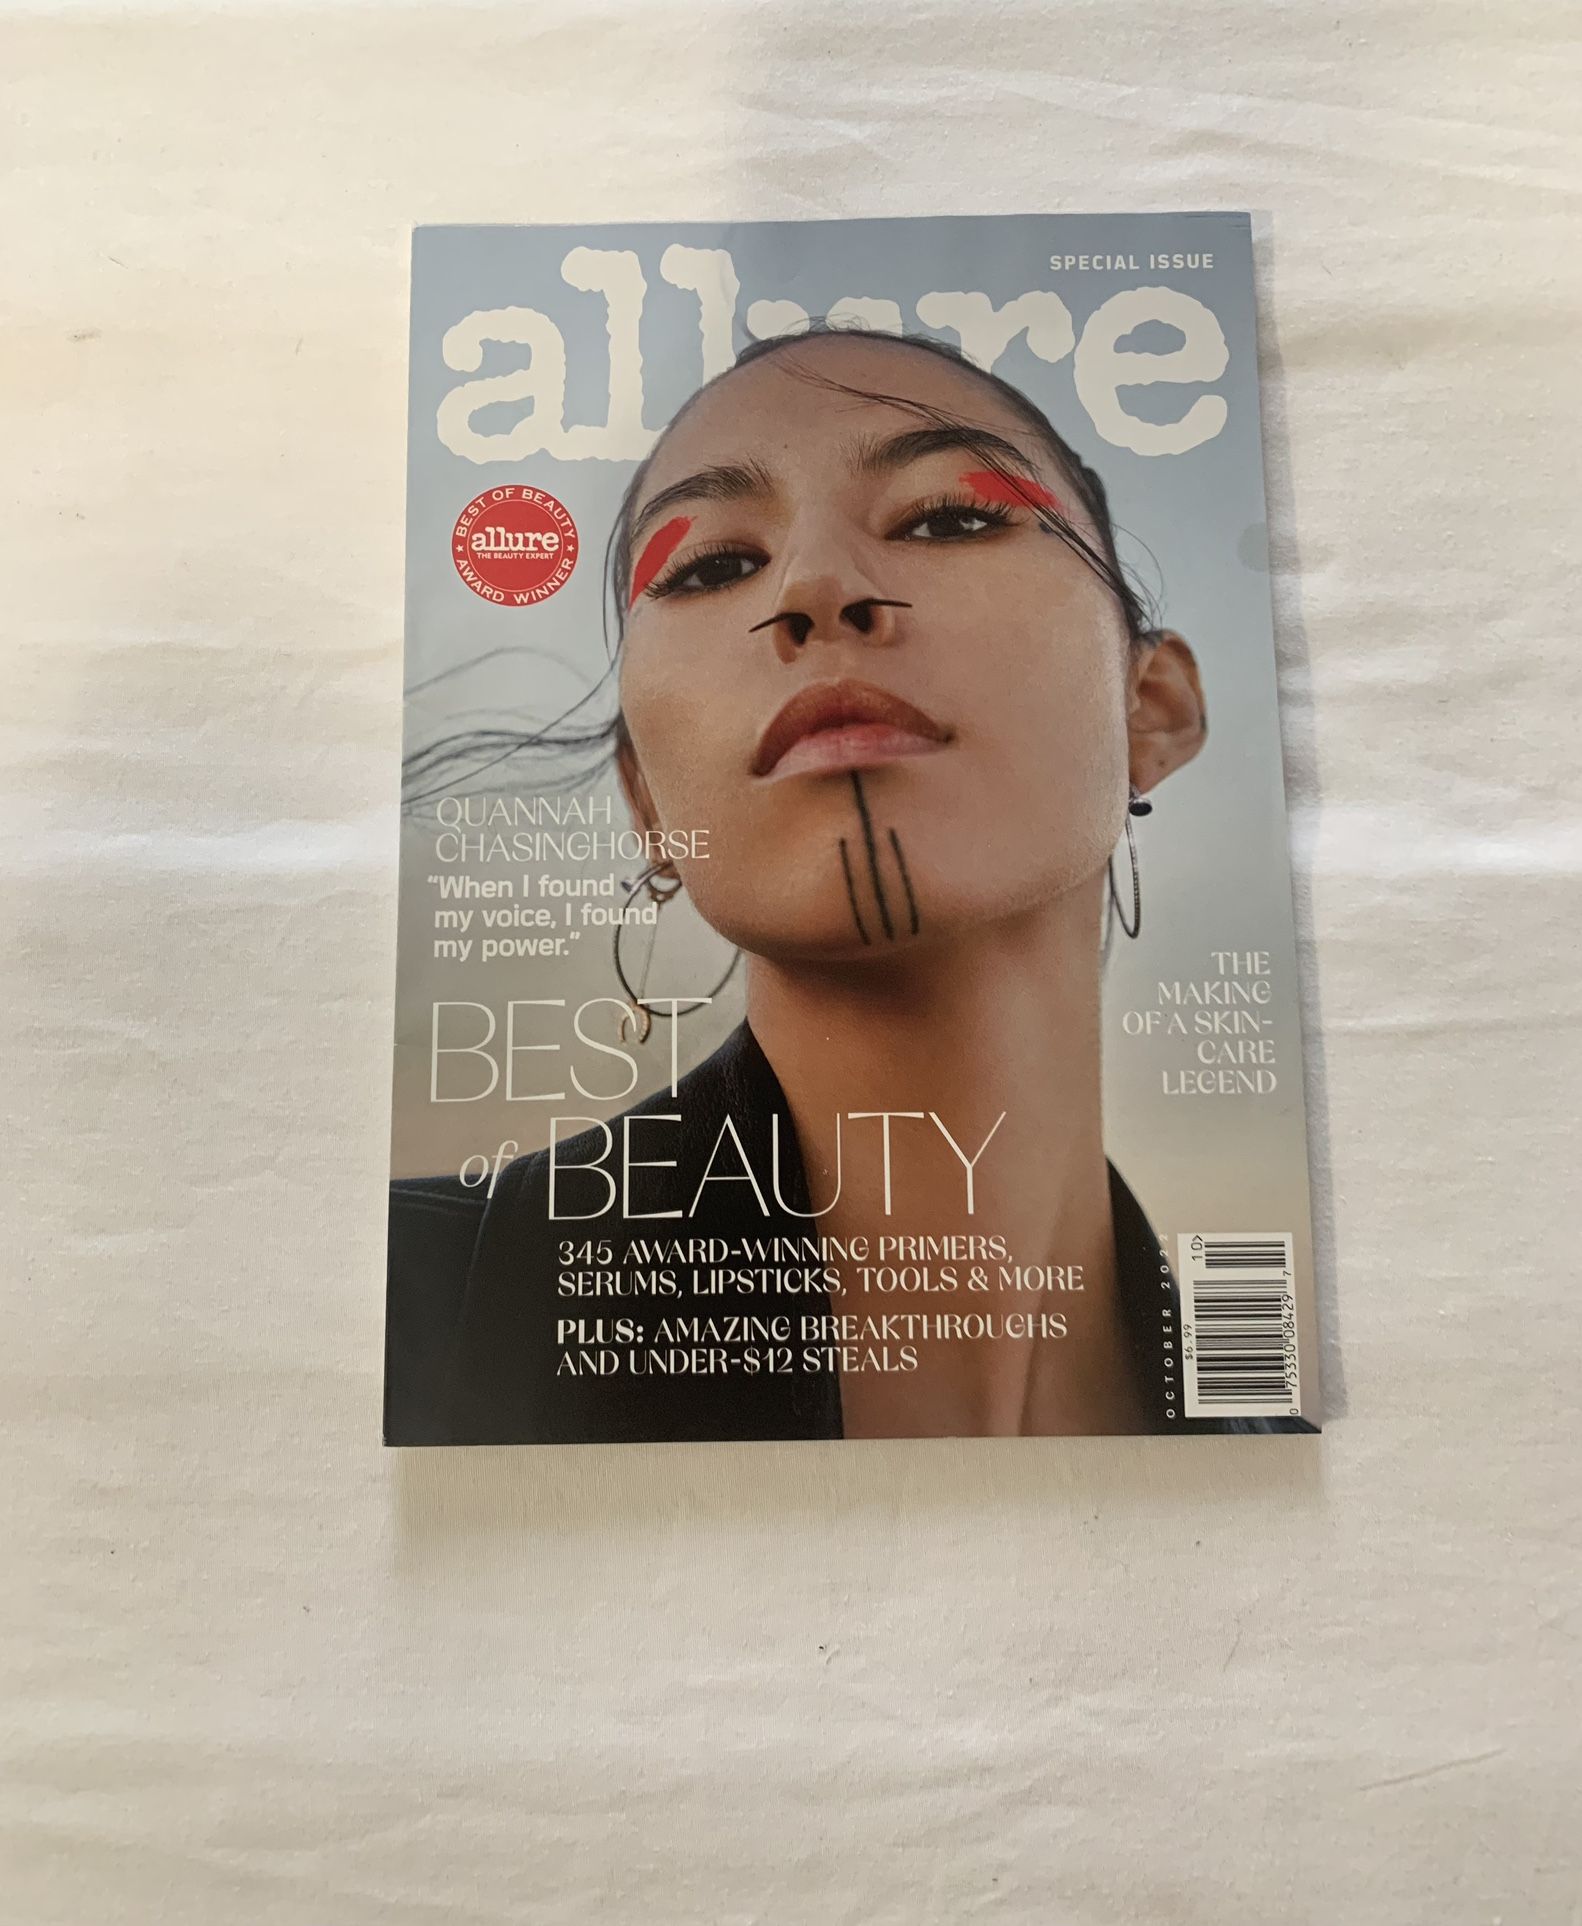 Allure Quannah ChasingHorse “When I Found My Voice” Issue October 2022 Magazine